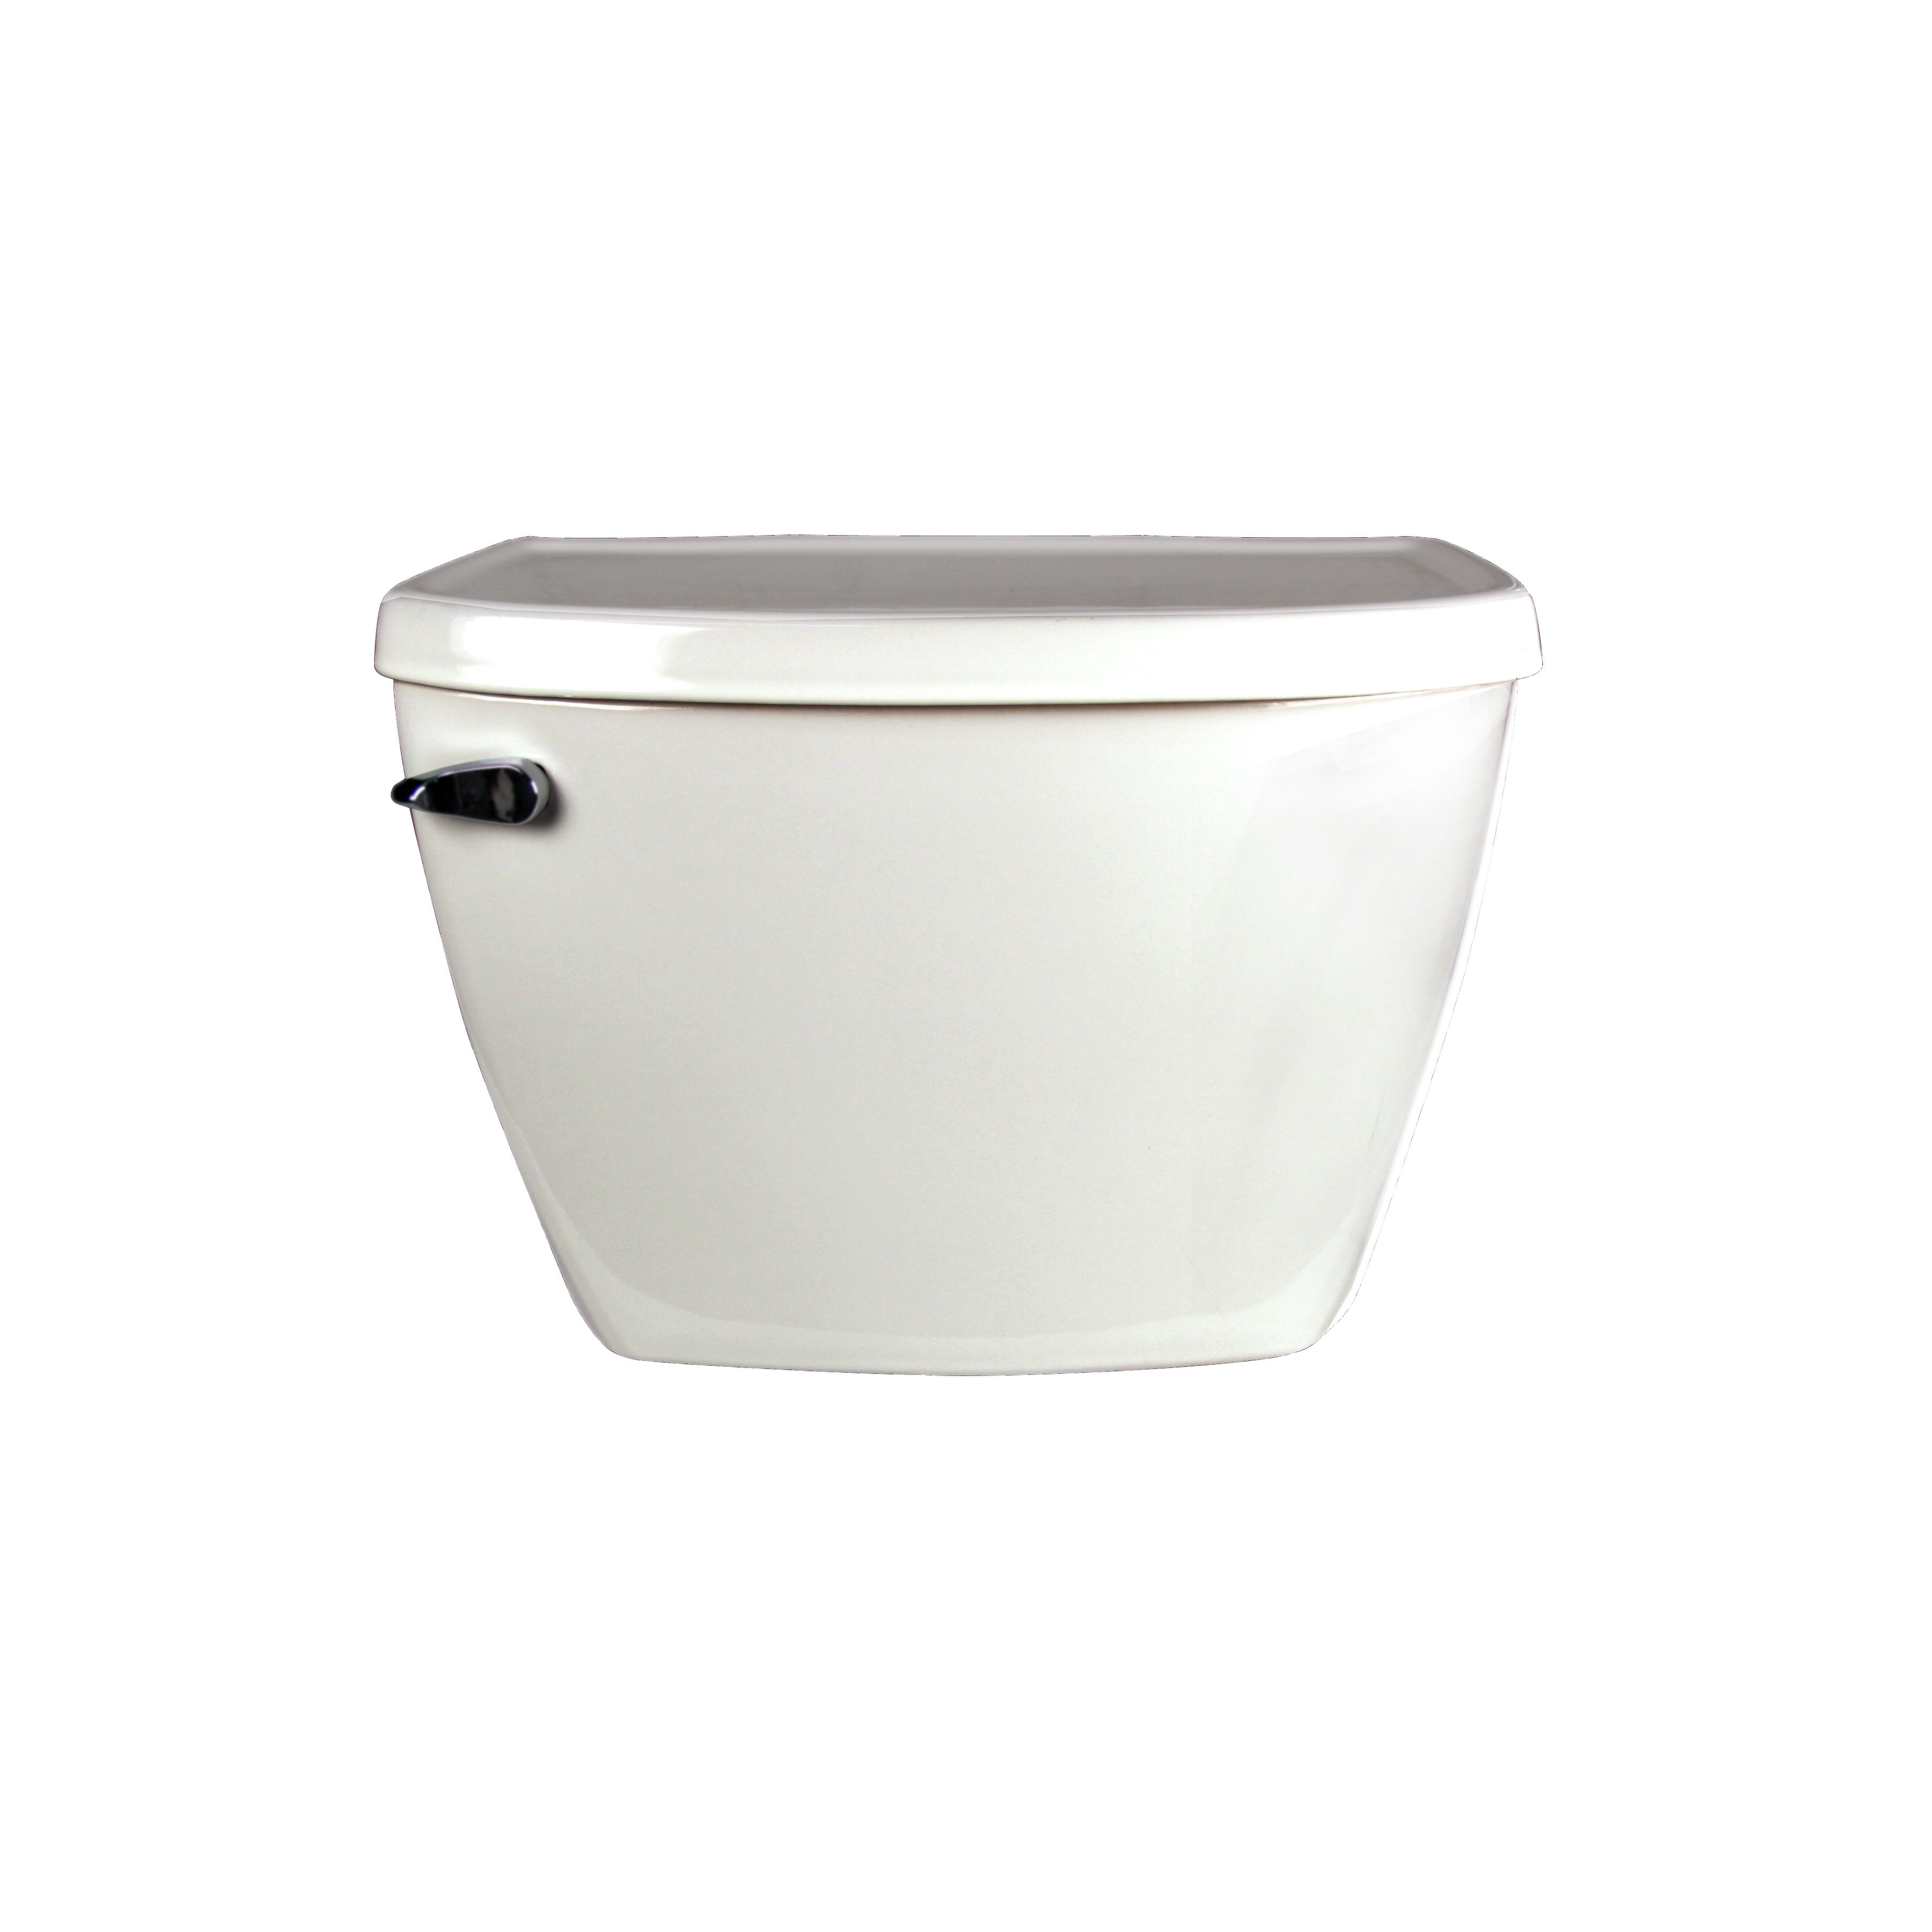 American Standard 4142.100.020 Cadet® FloWise® Toilet Tank With CoupWHTg Components, 1.1 gpf, White, Import